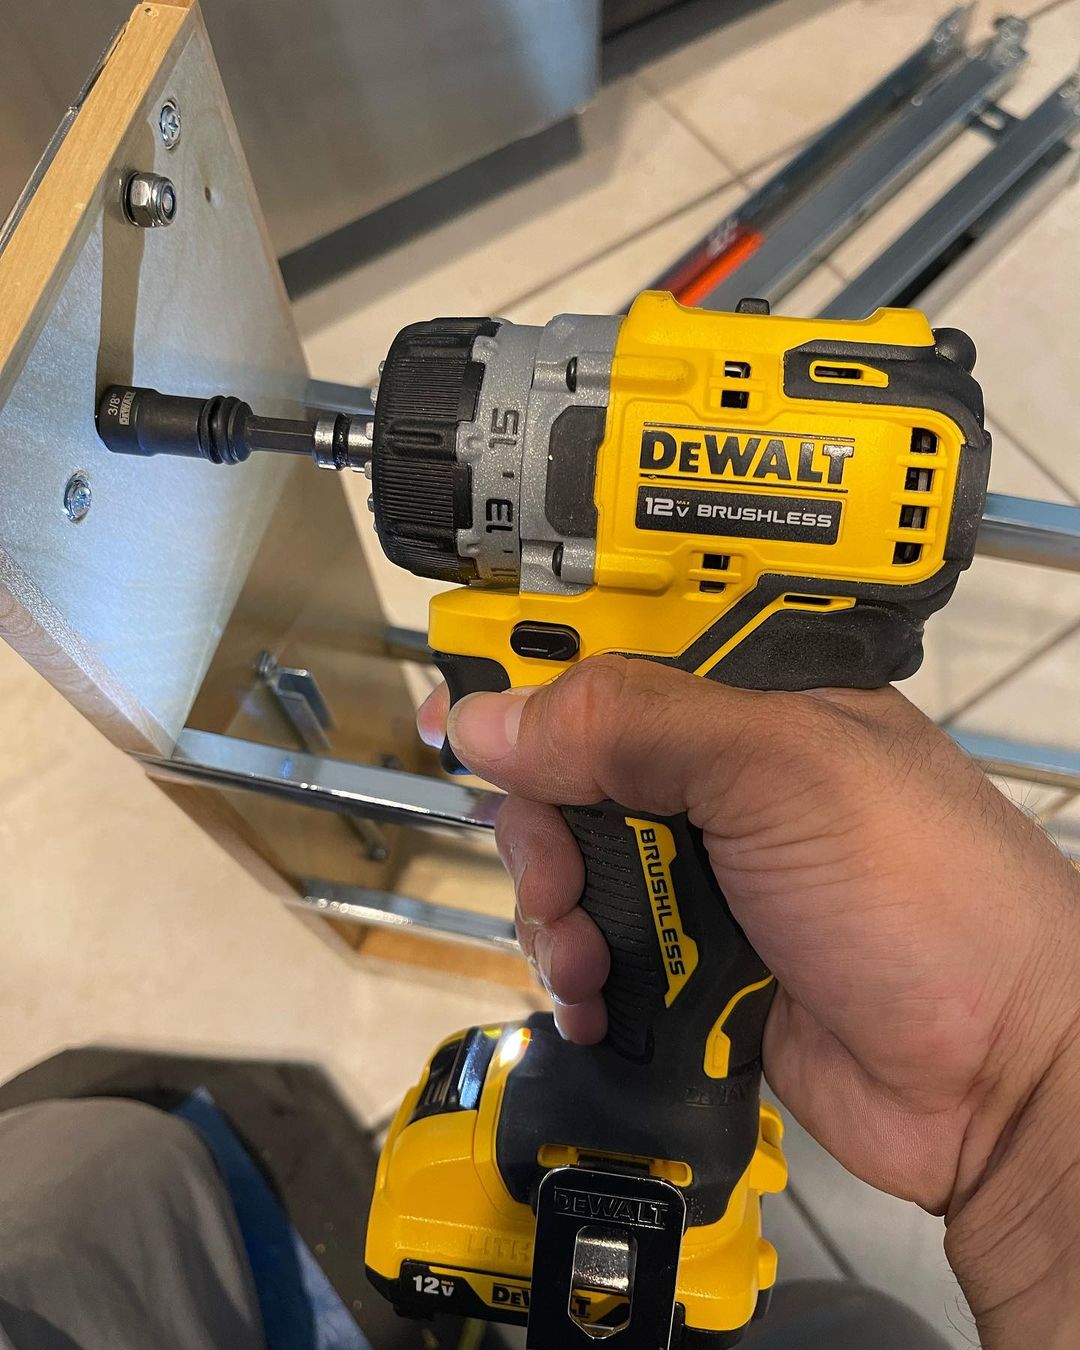 DEWALT on Twitter: "Whether on the job or home repair, the XTREME™ 12V MAX* 5-in-1 Drill/Driver multiple attachments to tackle a variety of jobs thrown your way. 📷: dewaltfreak /